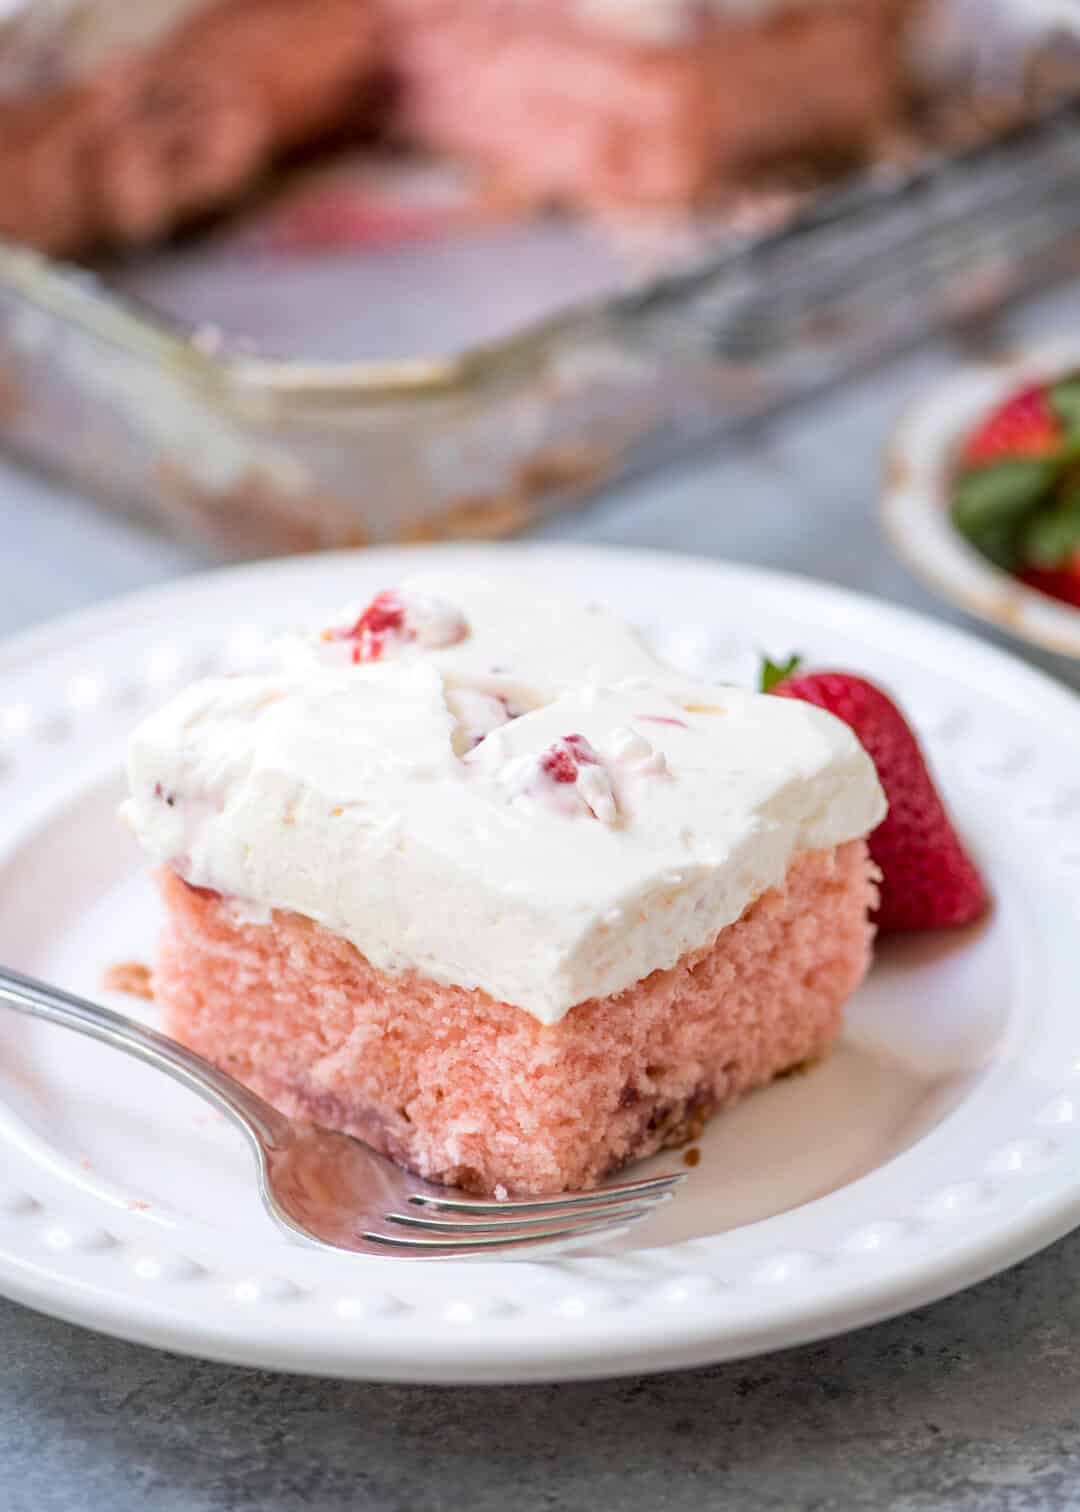 This baked from scratch Strawberry Cake with Strawberry Cream Cheese Frosting has a tender texture and luscious strawberry studded frosting!